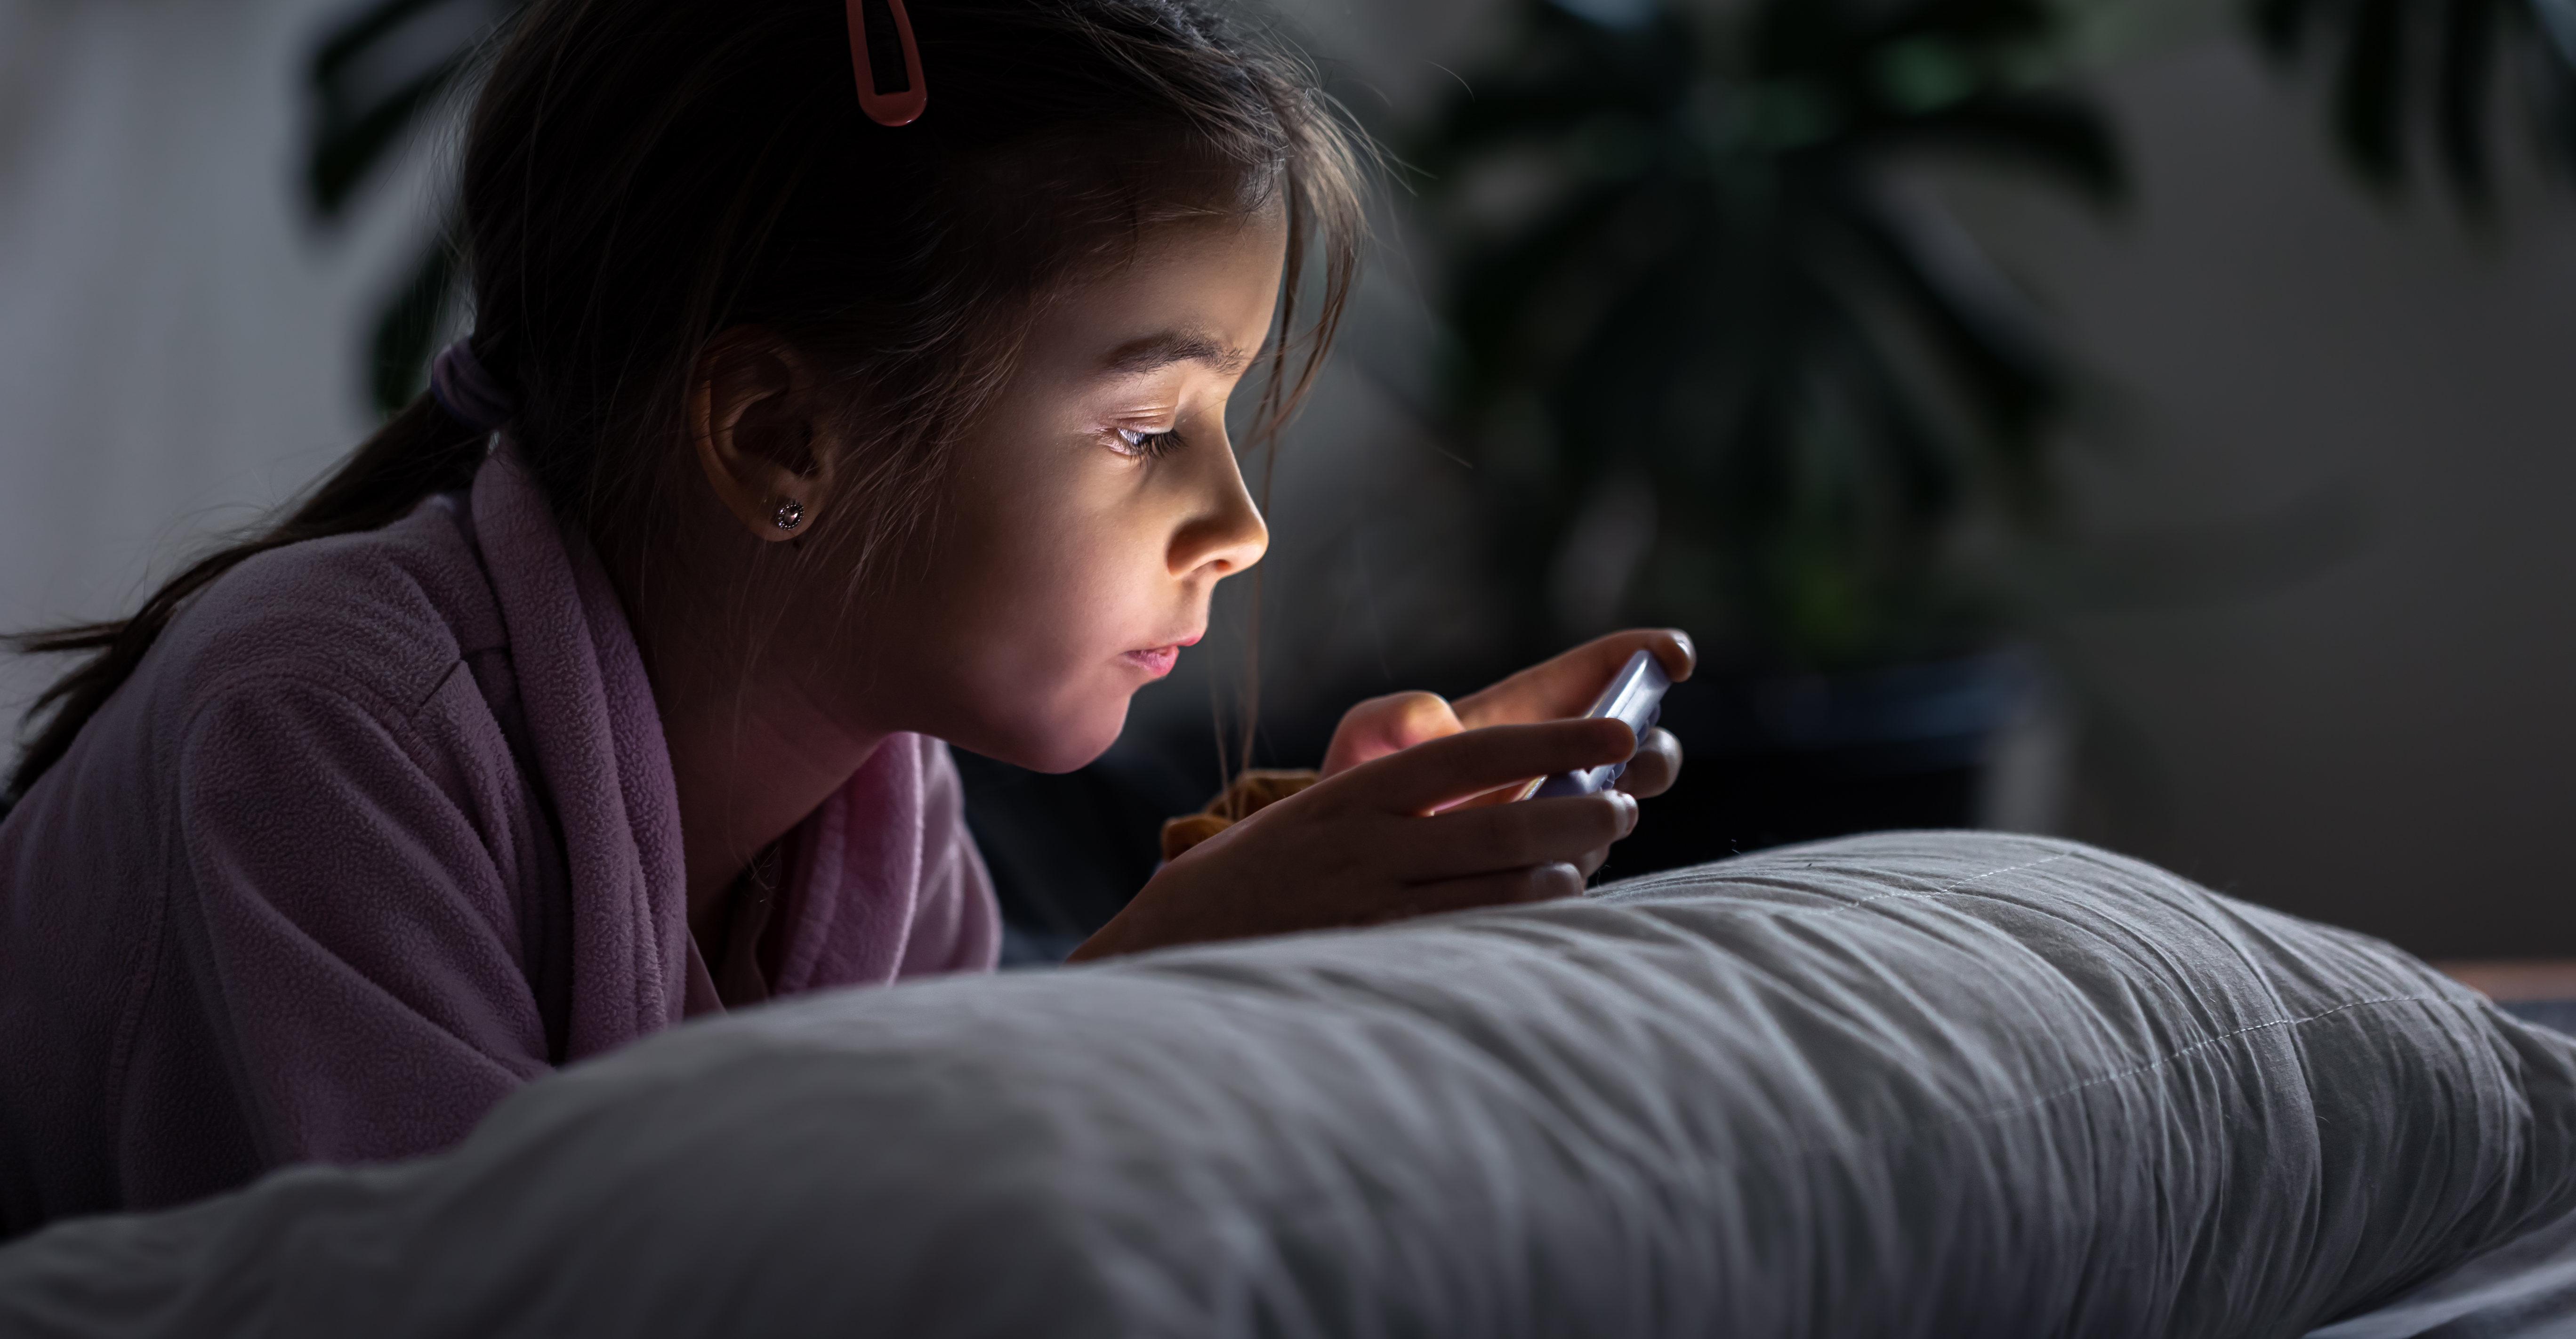 Little girl uses a smartphone lying on the pillow at home.